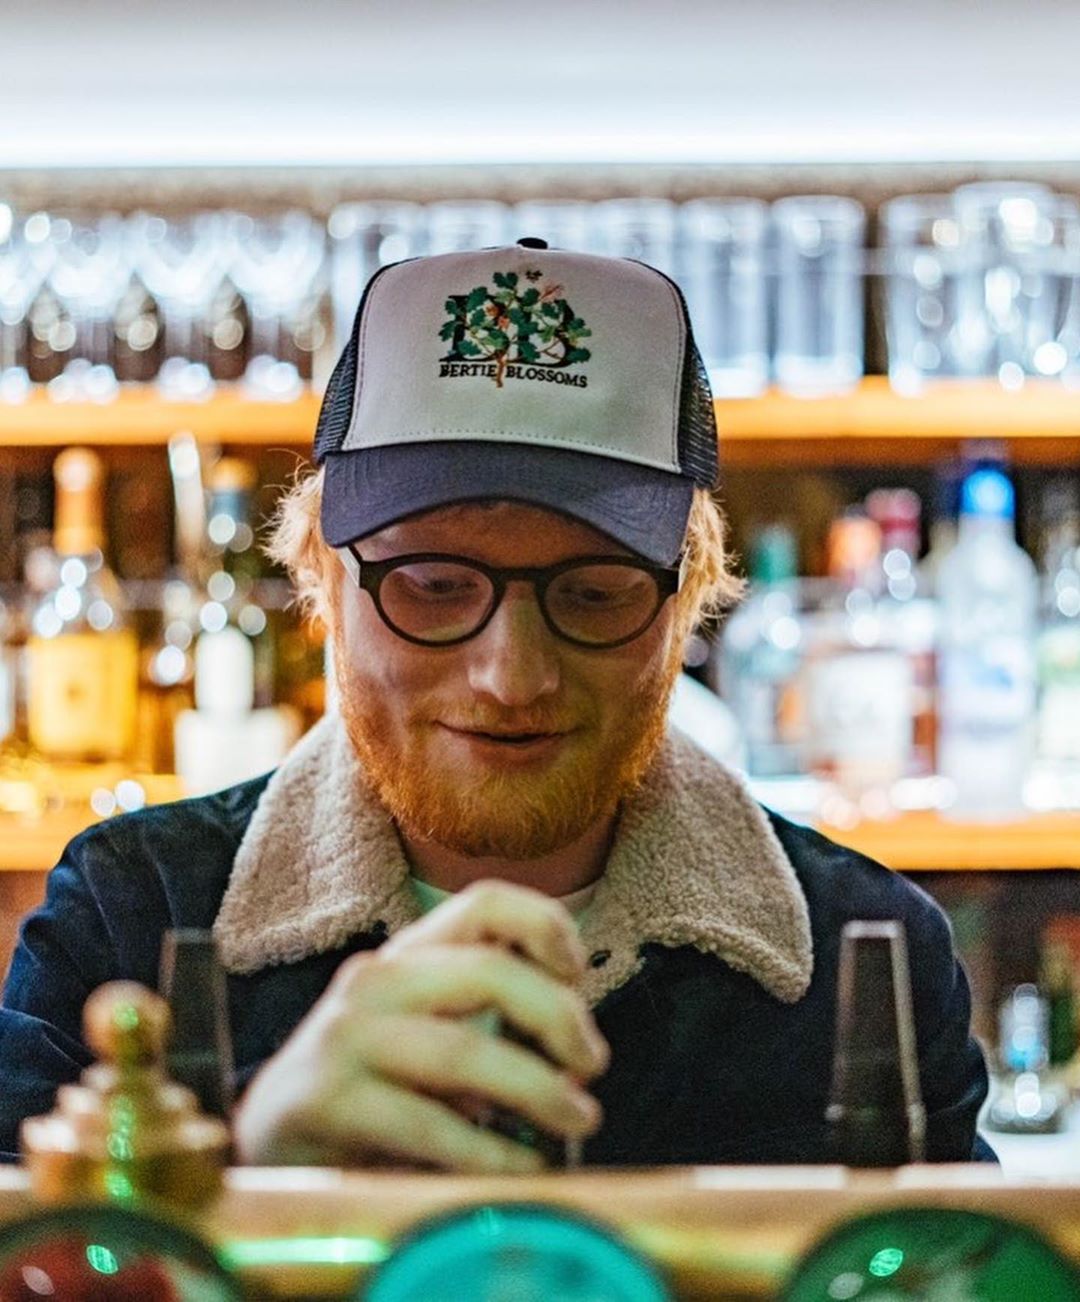 ed-sheeran-takes-temporary-break-from-music-to-open-beer-pub-2